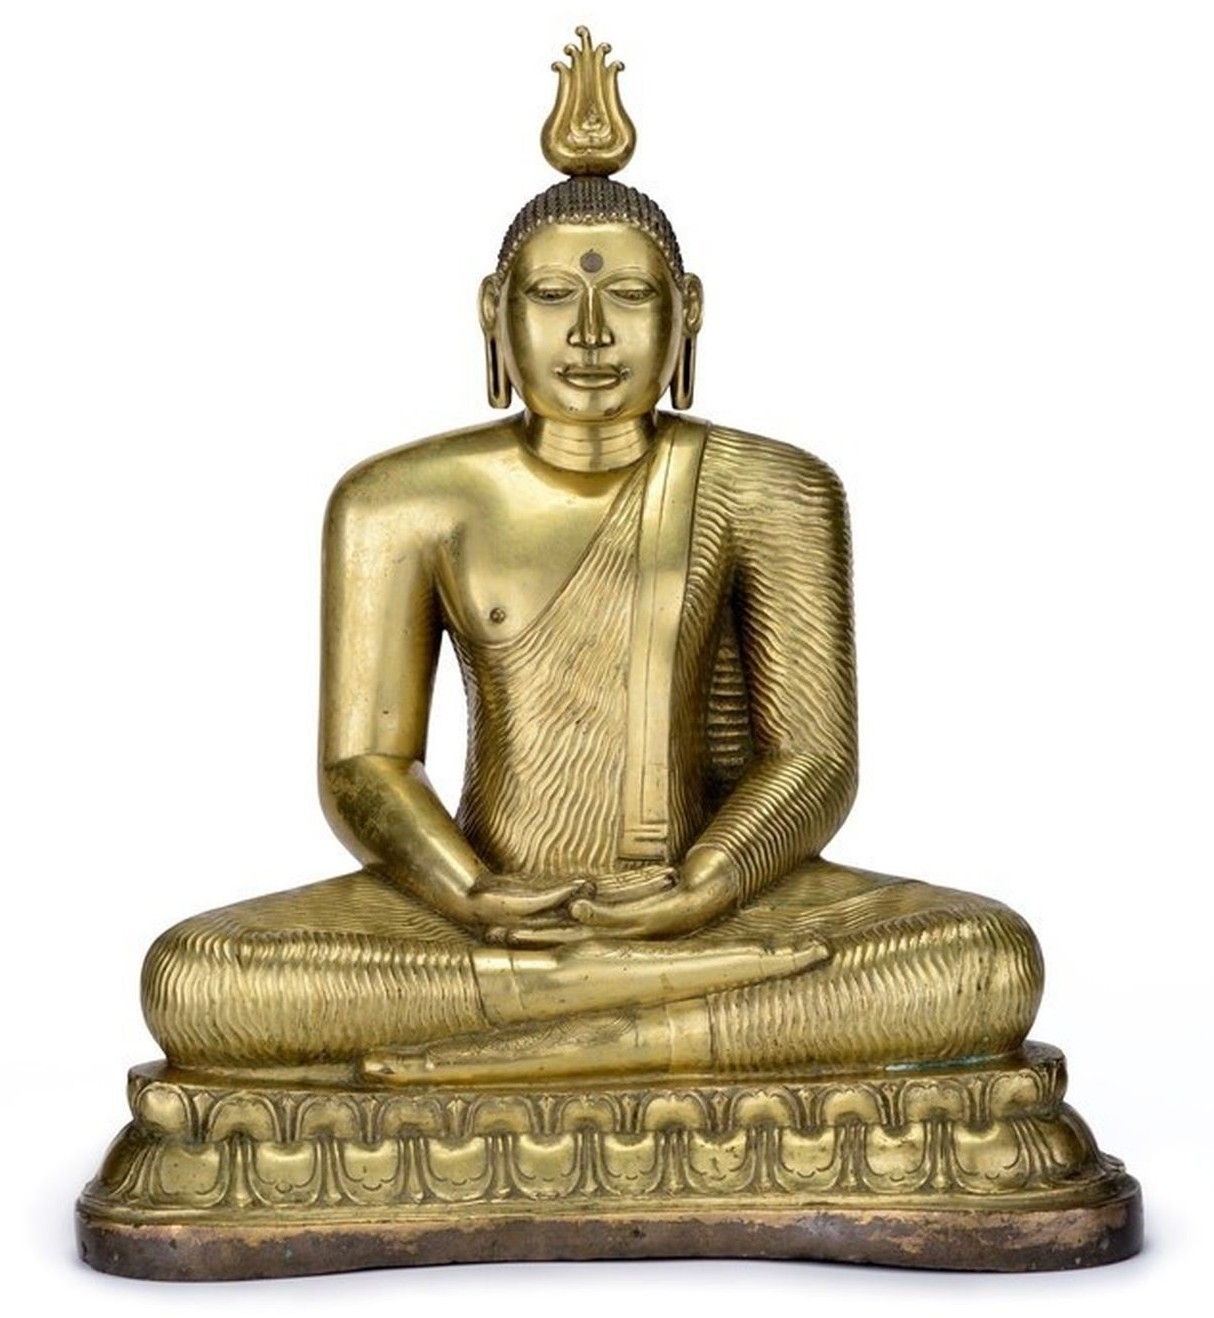 Buddha Shakyamuni, Sri Lanka, Kandy period, 18th century, gilt copper alloy with partial black coating, 42 x 36 x 24 cm, Los Angeles County Museum of Art, purchased with funds provided by Murray and Virginia Ward. Photo from lacma.org